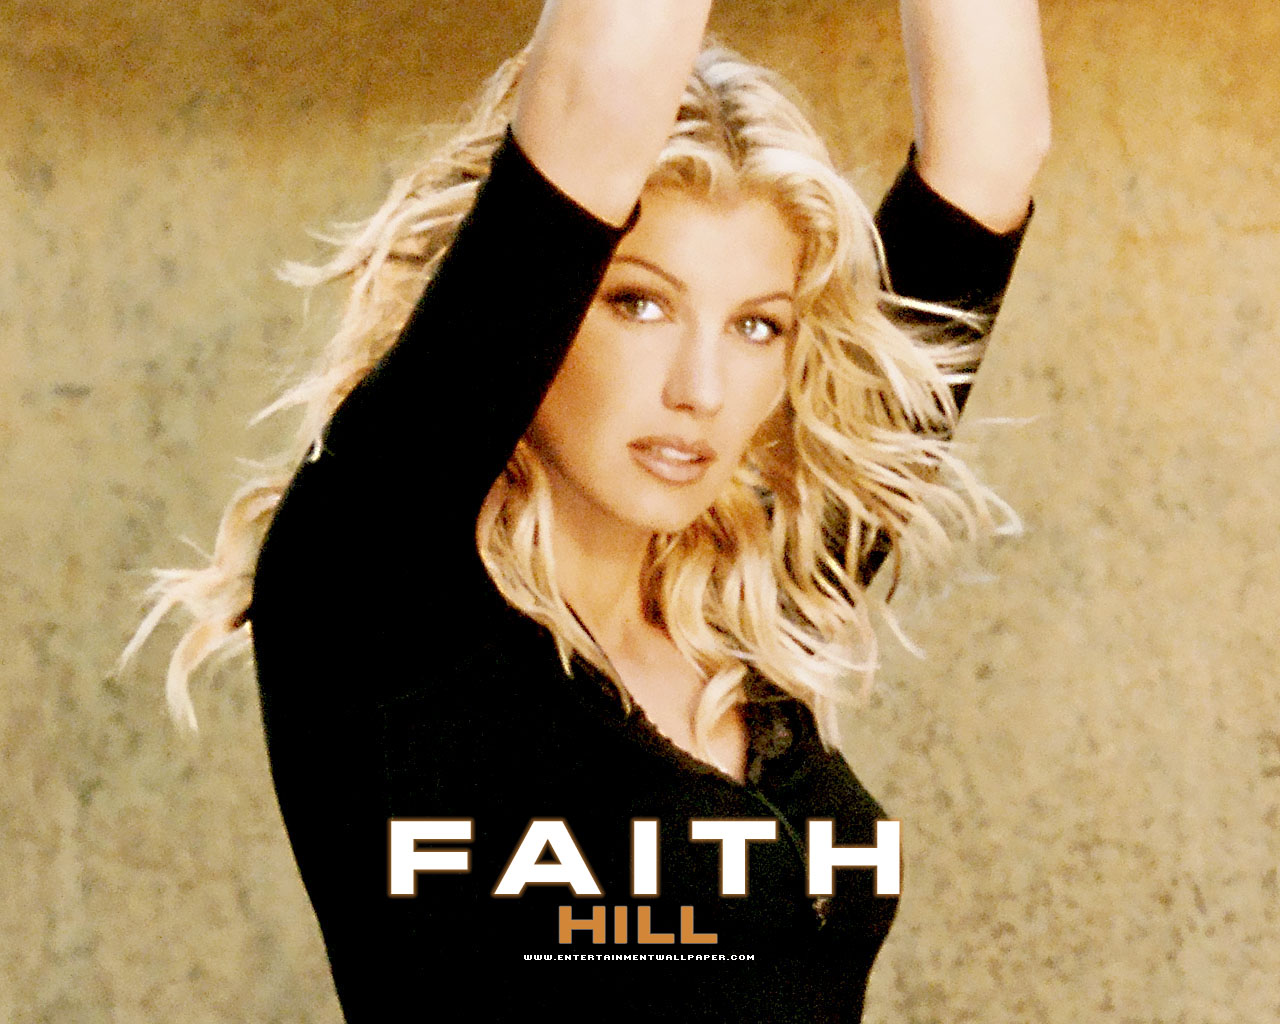 Faith Hill Hands Up Album Cover Wallpaper Christian And